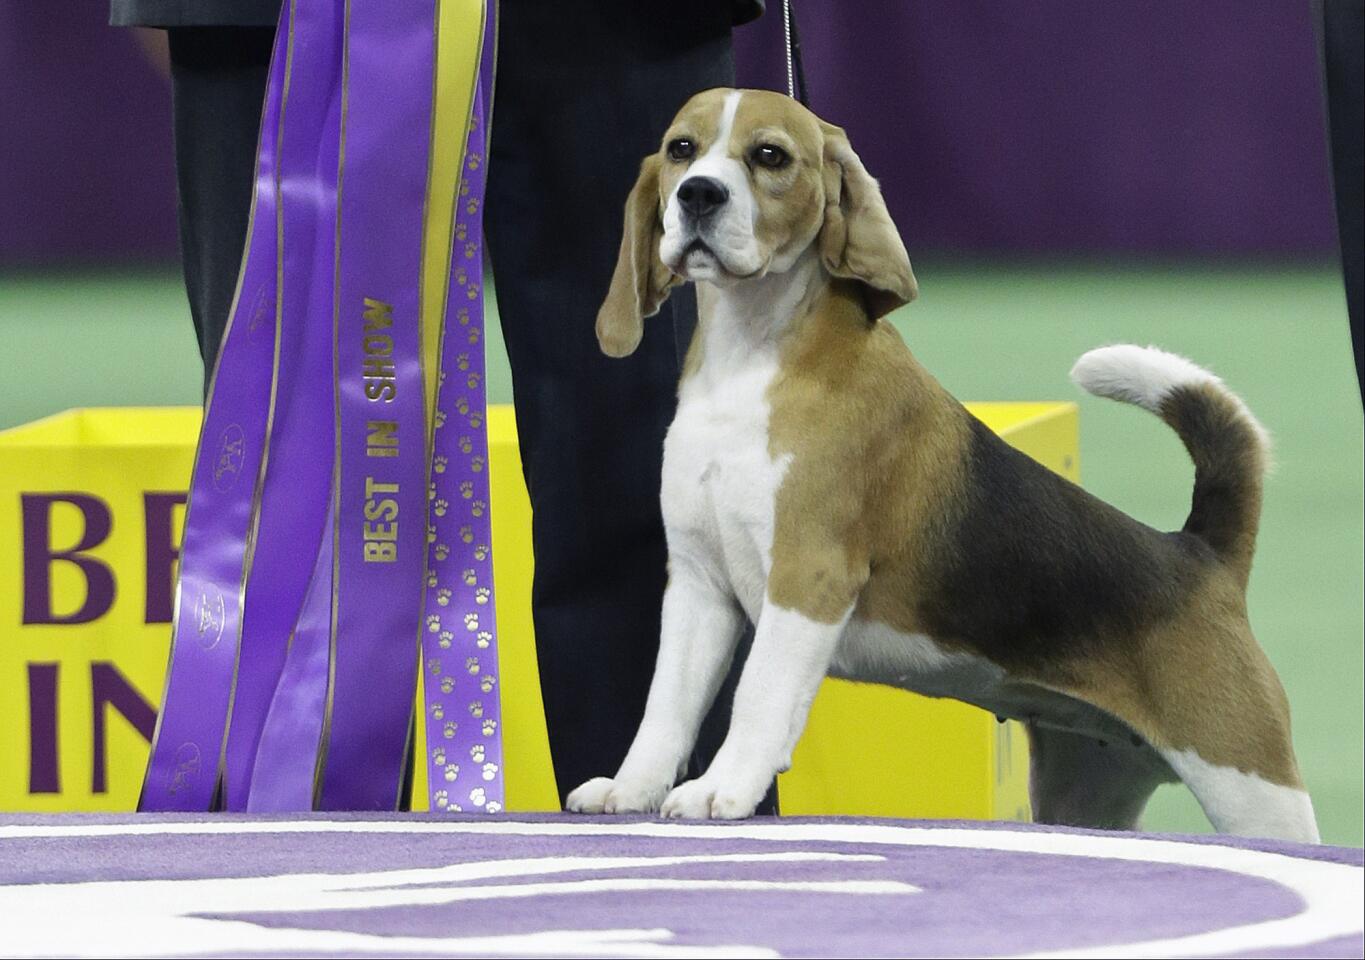 Miss P, a 15-inch beagle, stands tall after winning the Best in Show at the Westminster Kennel Club Dog Show.